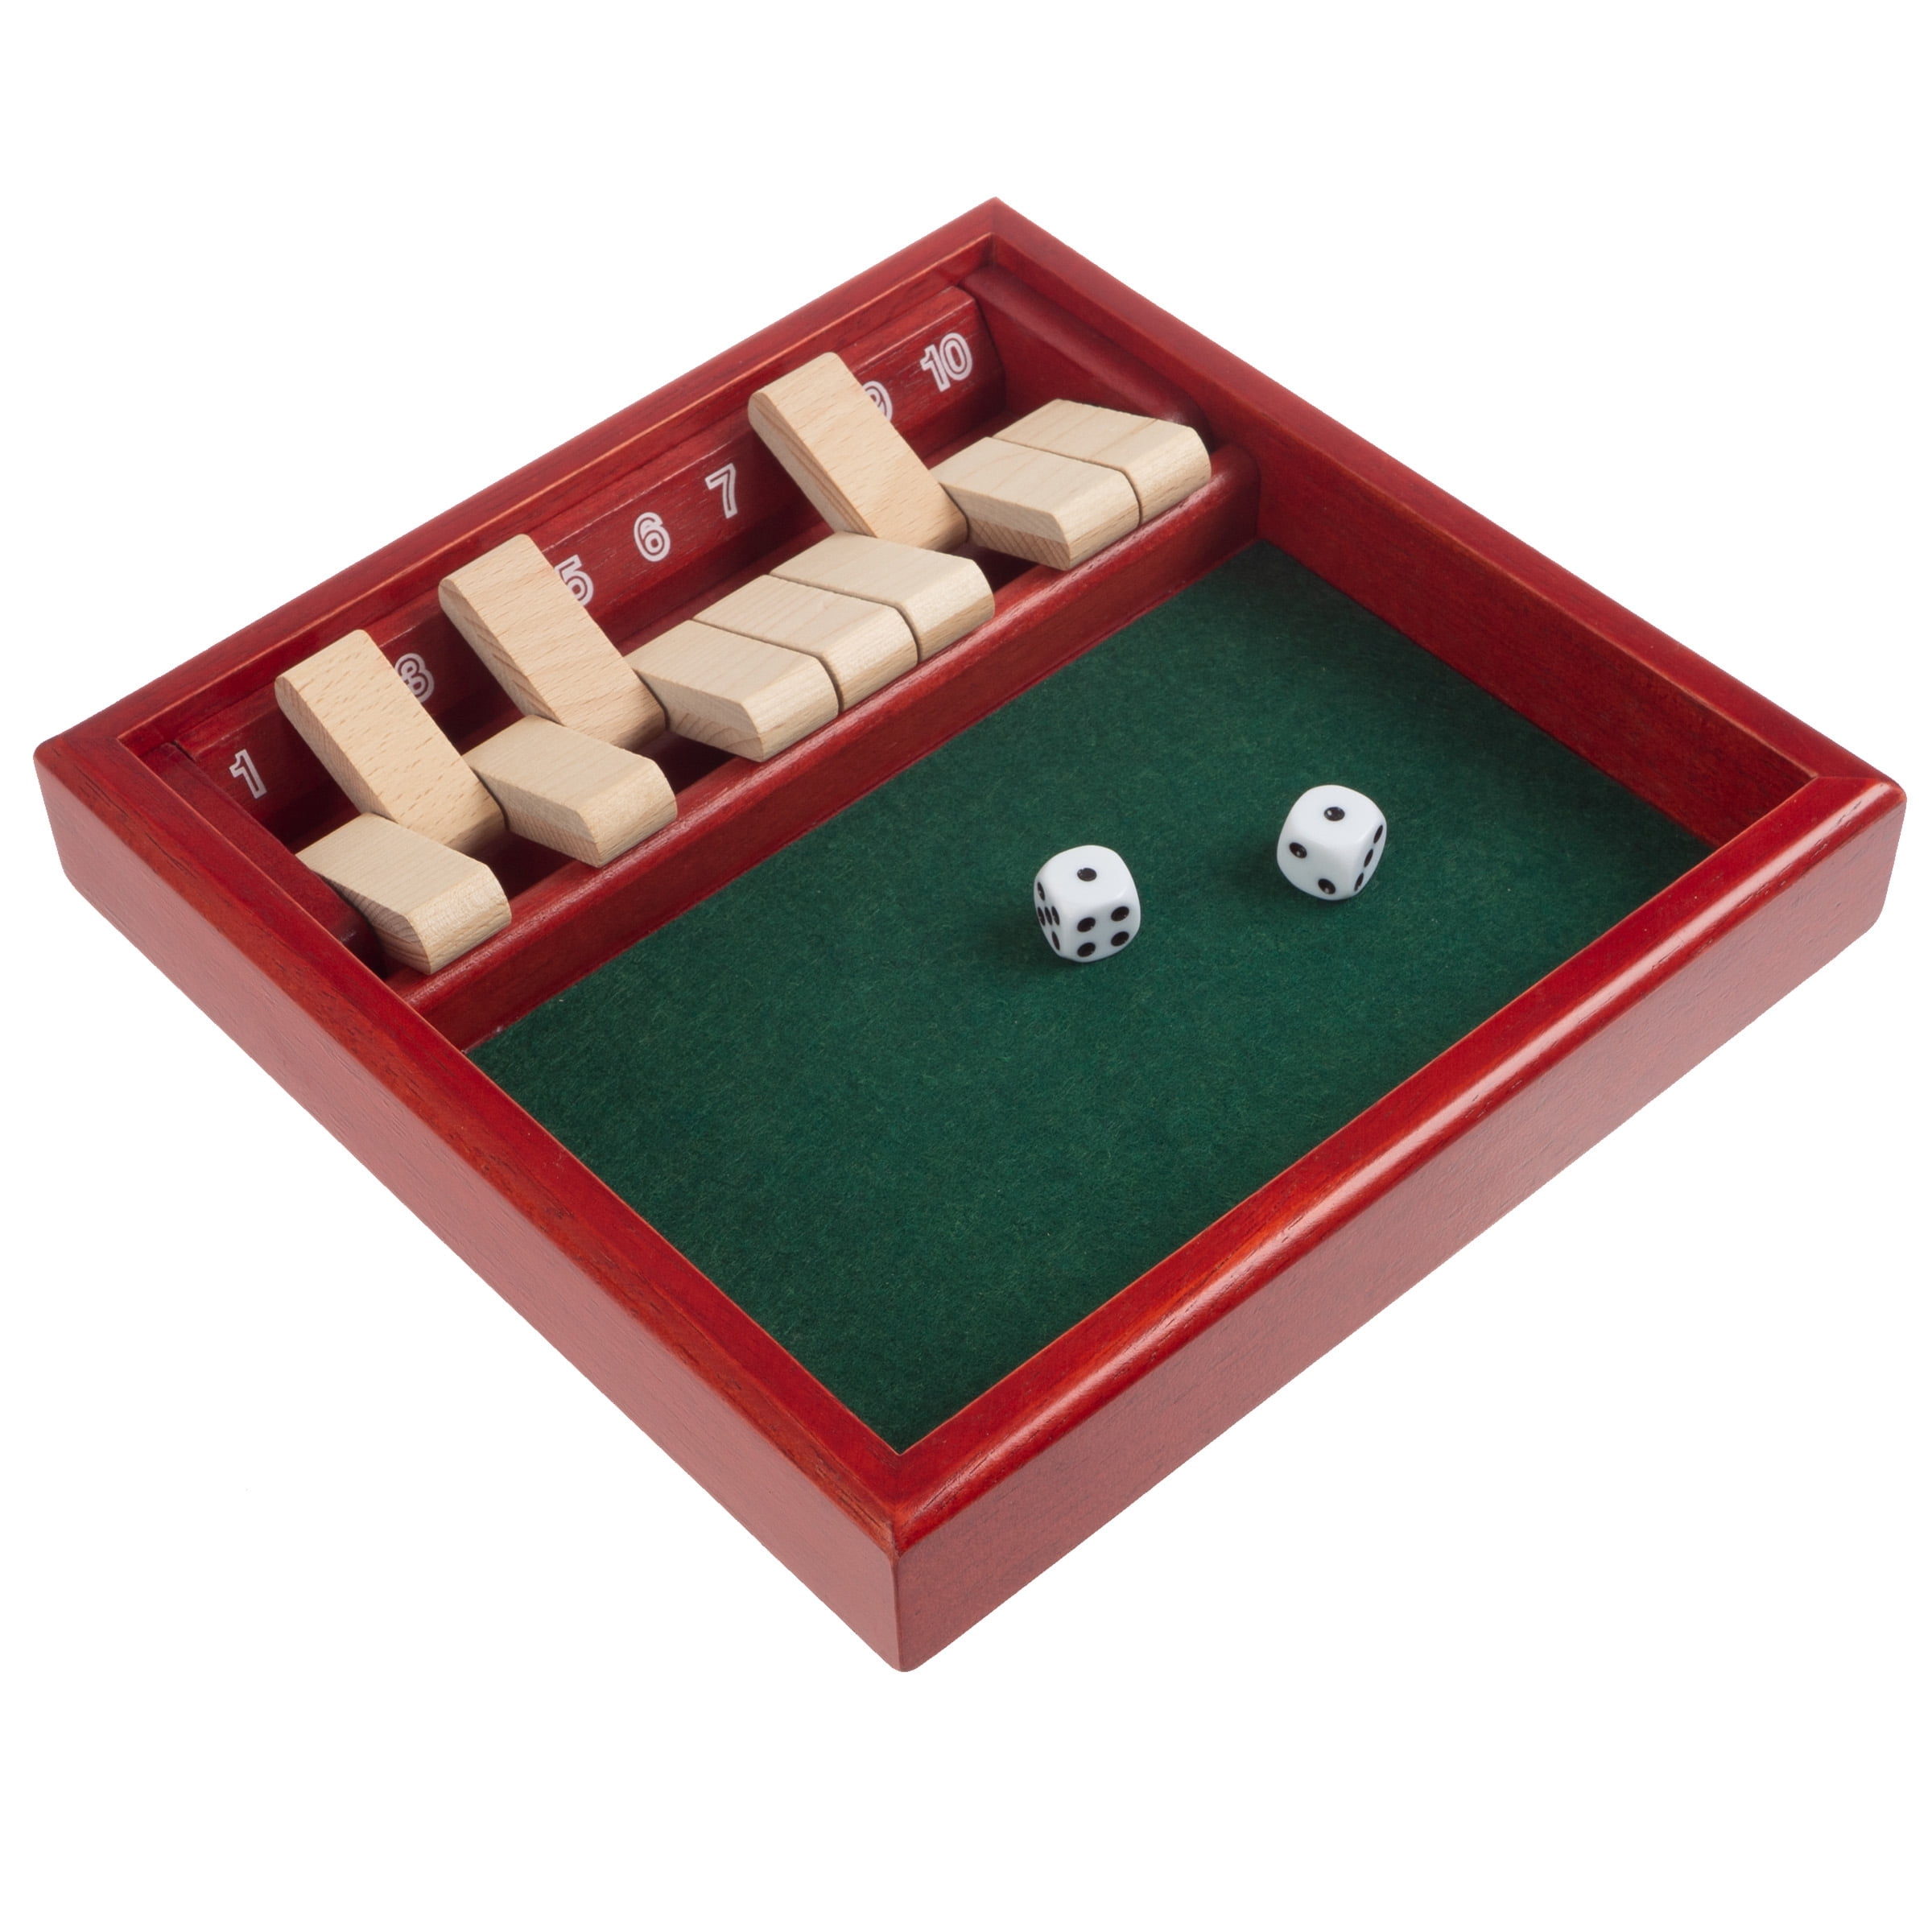 Details about   DA VINCI Professional Red or Green Dice Cup with 5 dice 